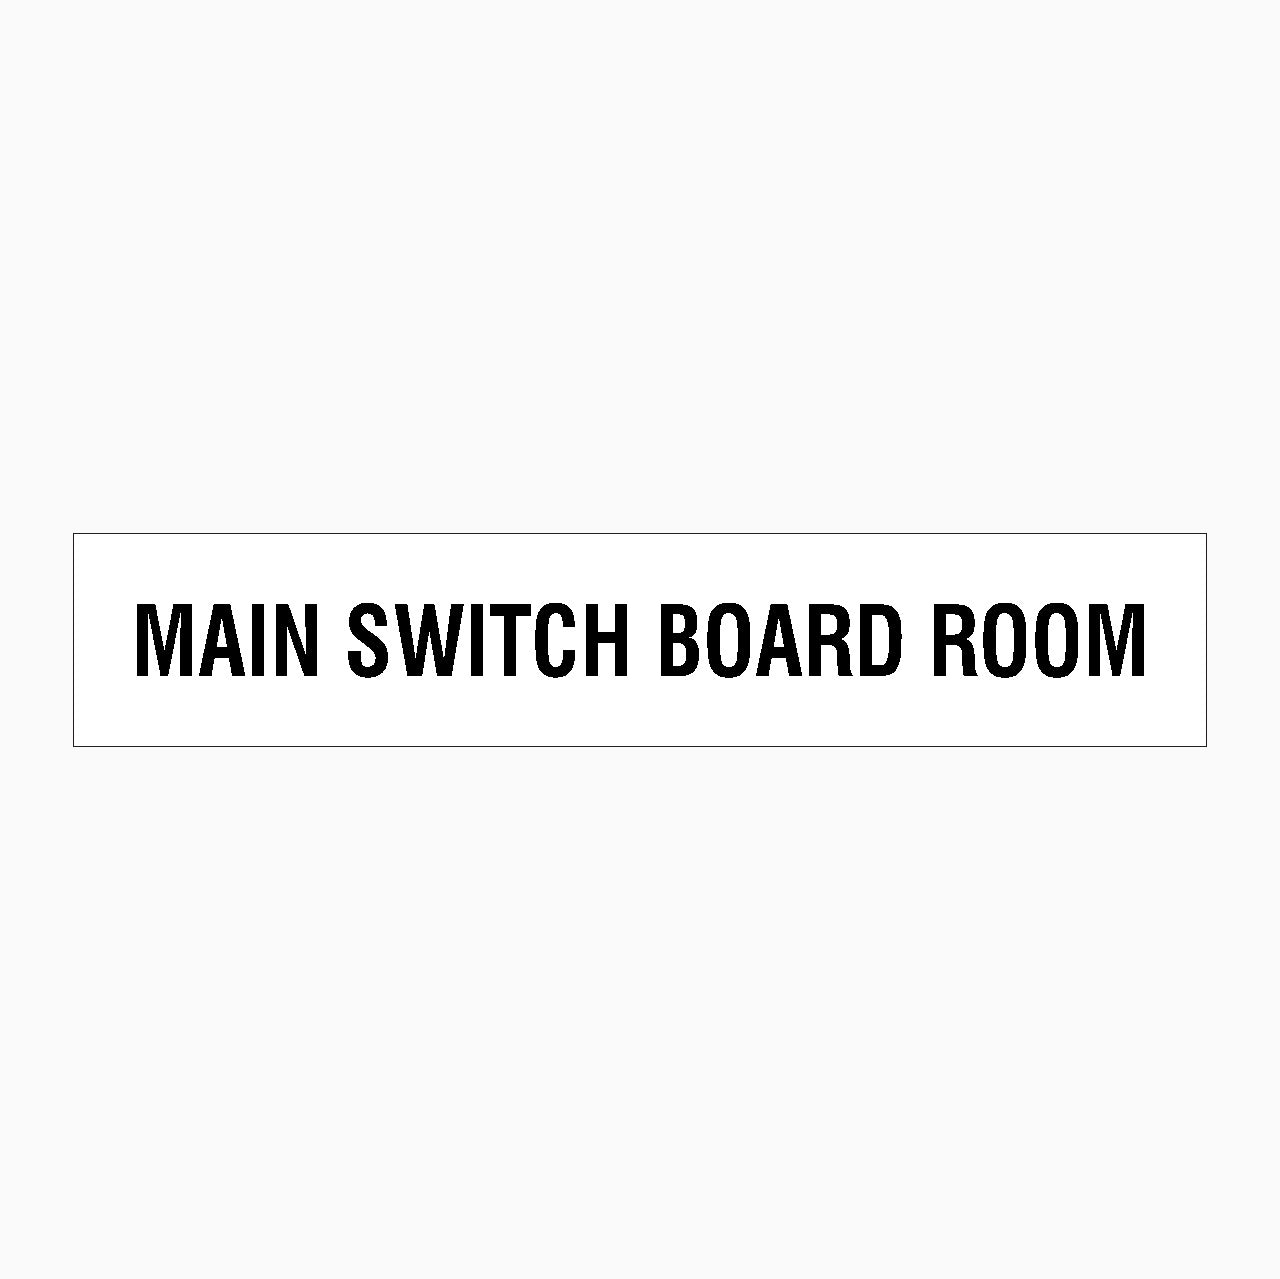 MAIN SWITCH BOARD ROOM SIGN